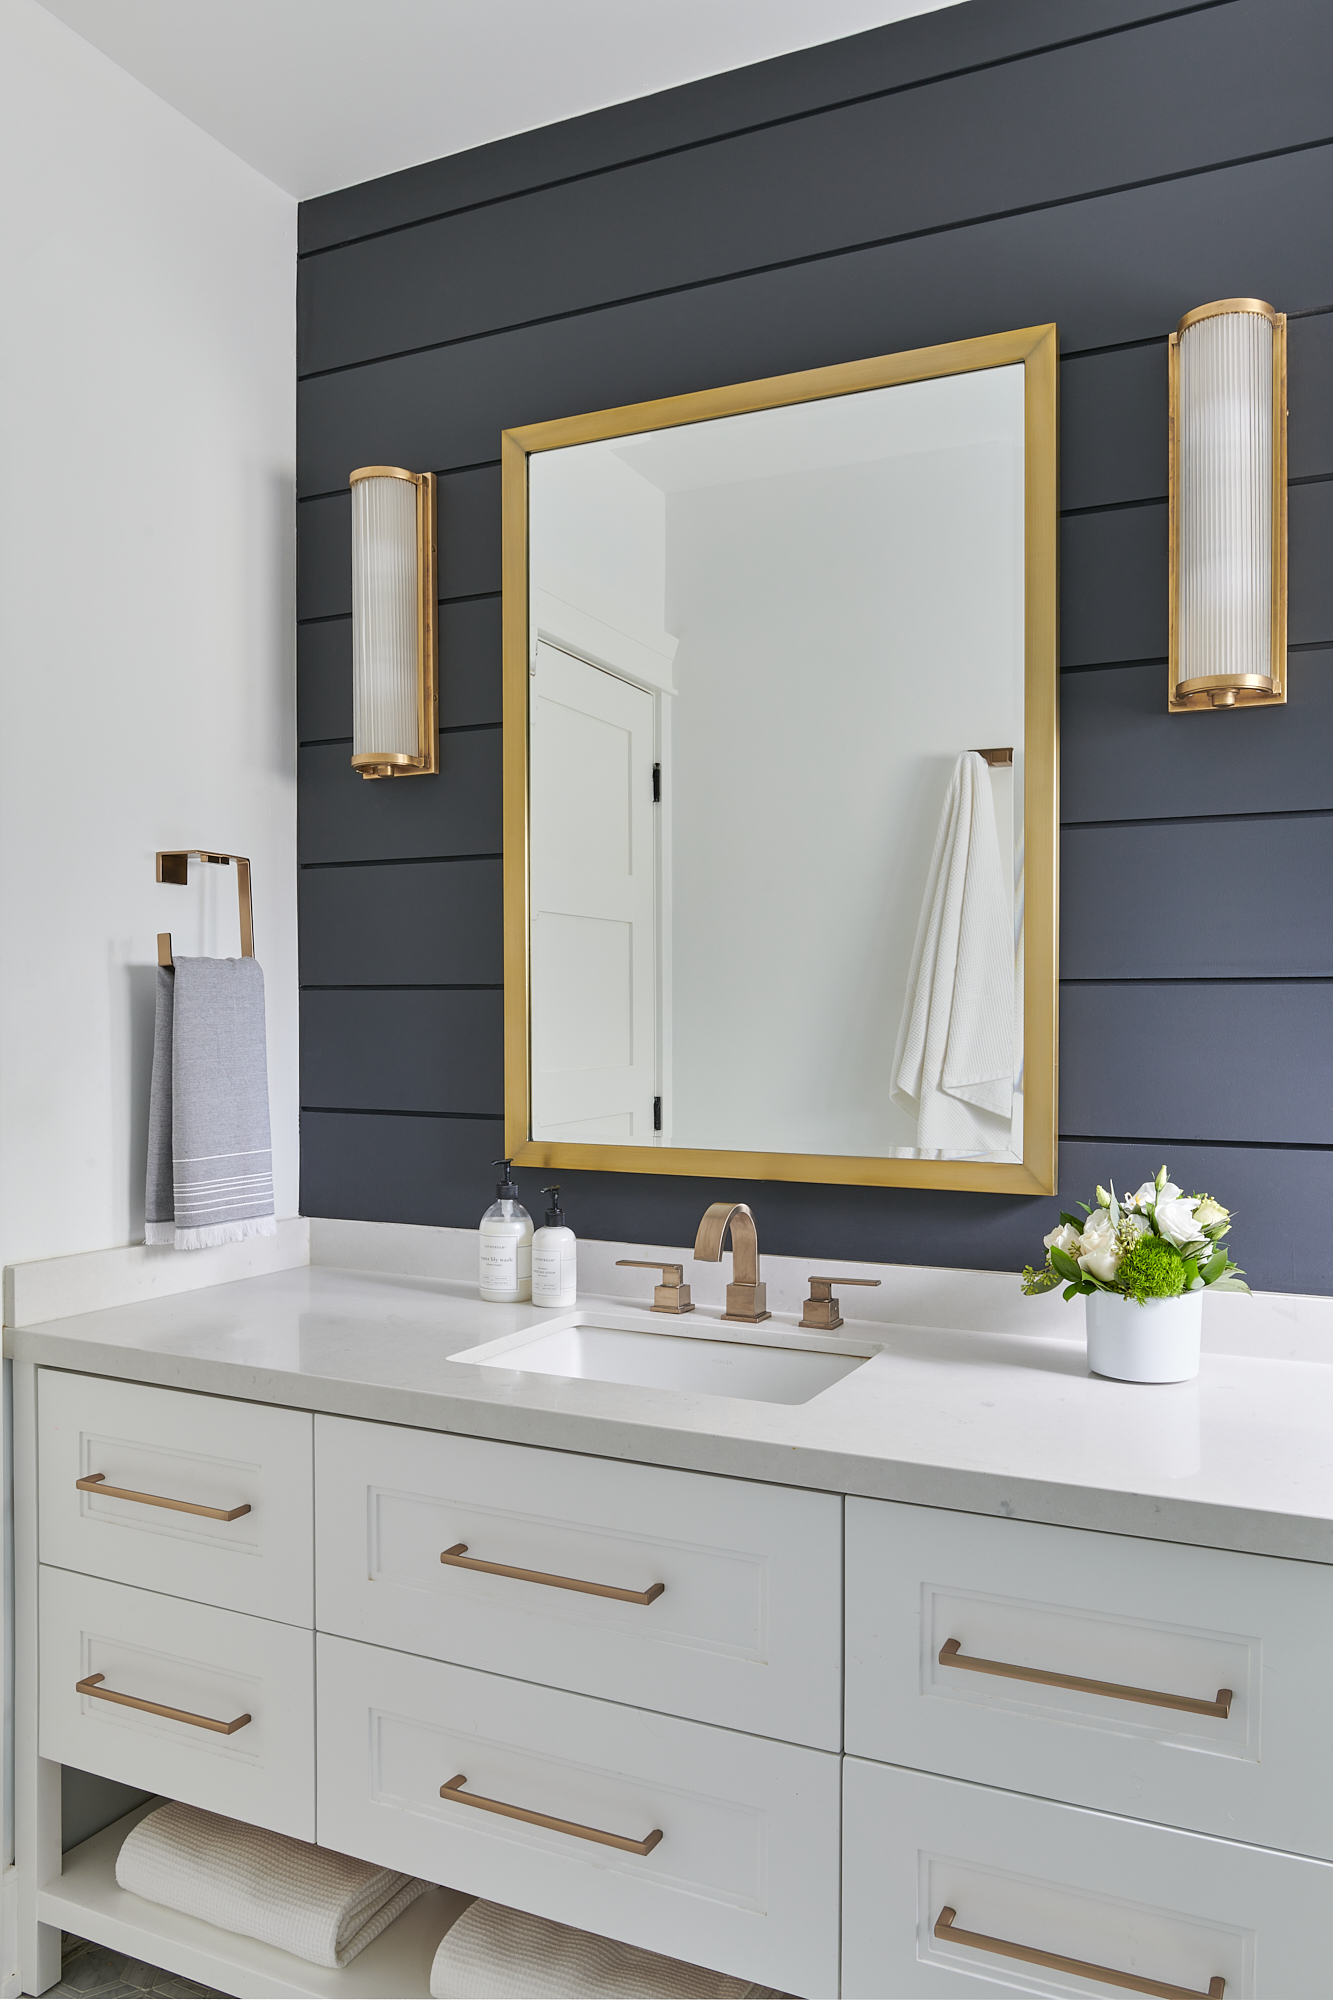 custom bathroom design with white vanity, gold hardware, mirror, and wall sconces, all on a striking black shiplap wall